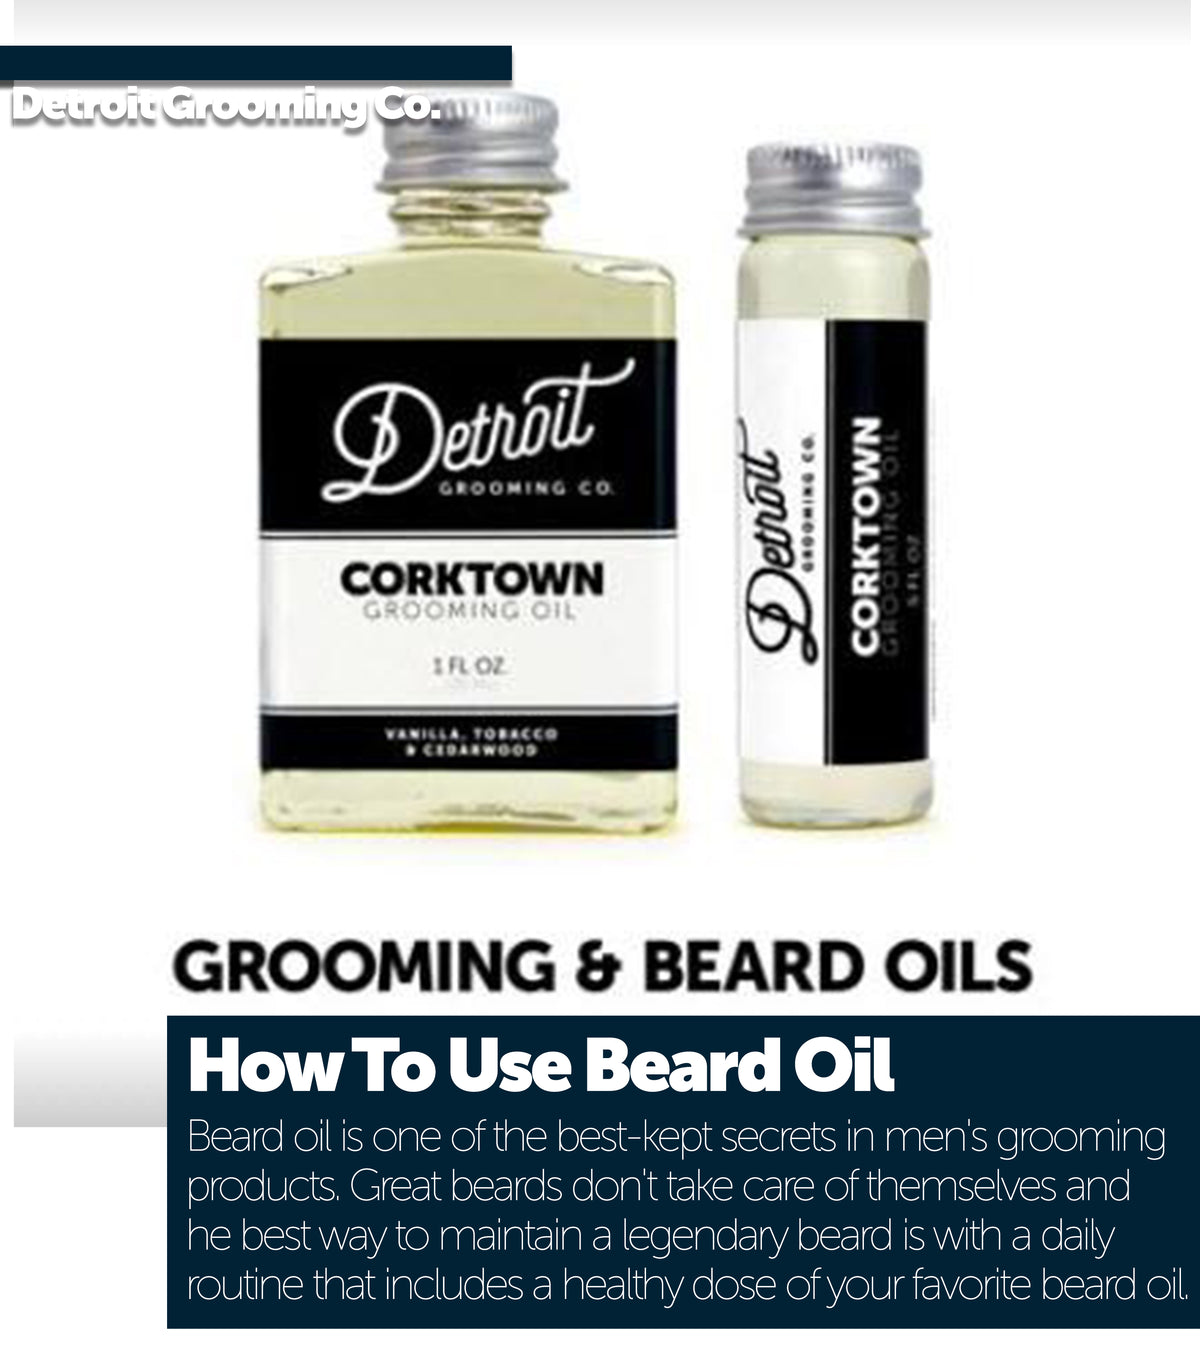 DETROIT GROOMING CO. GUIDE ON HOW TO USE BEARD OIL